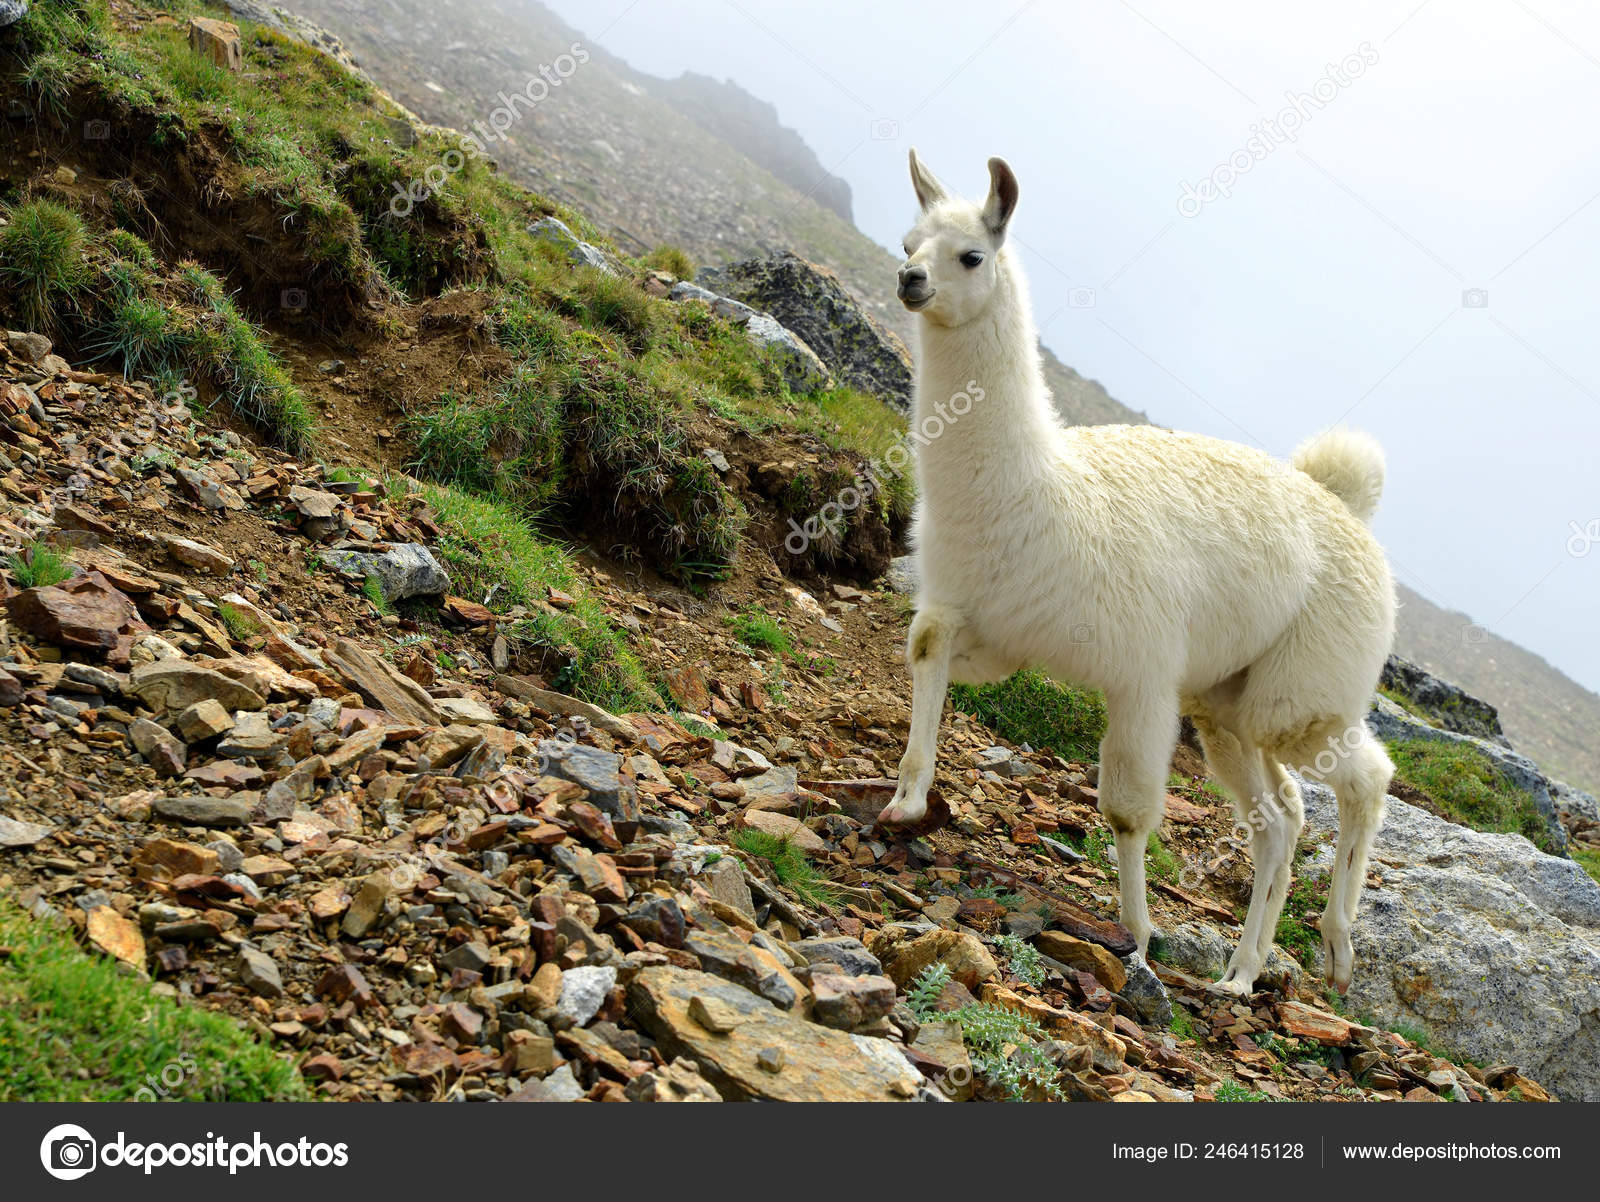 what is the difference between llama and lama and do llamas live in tibet